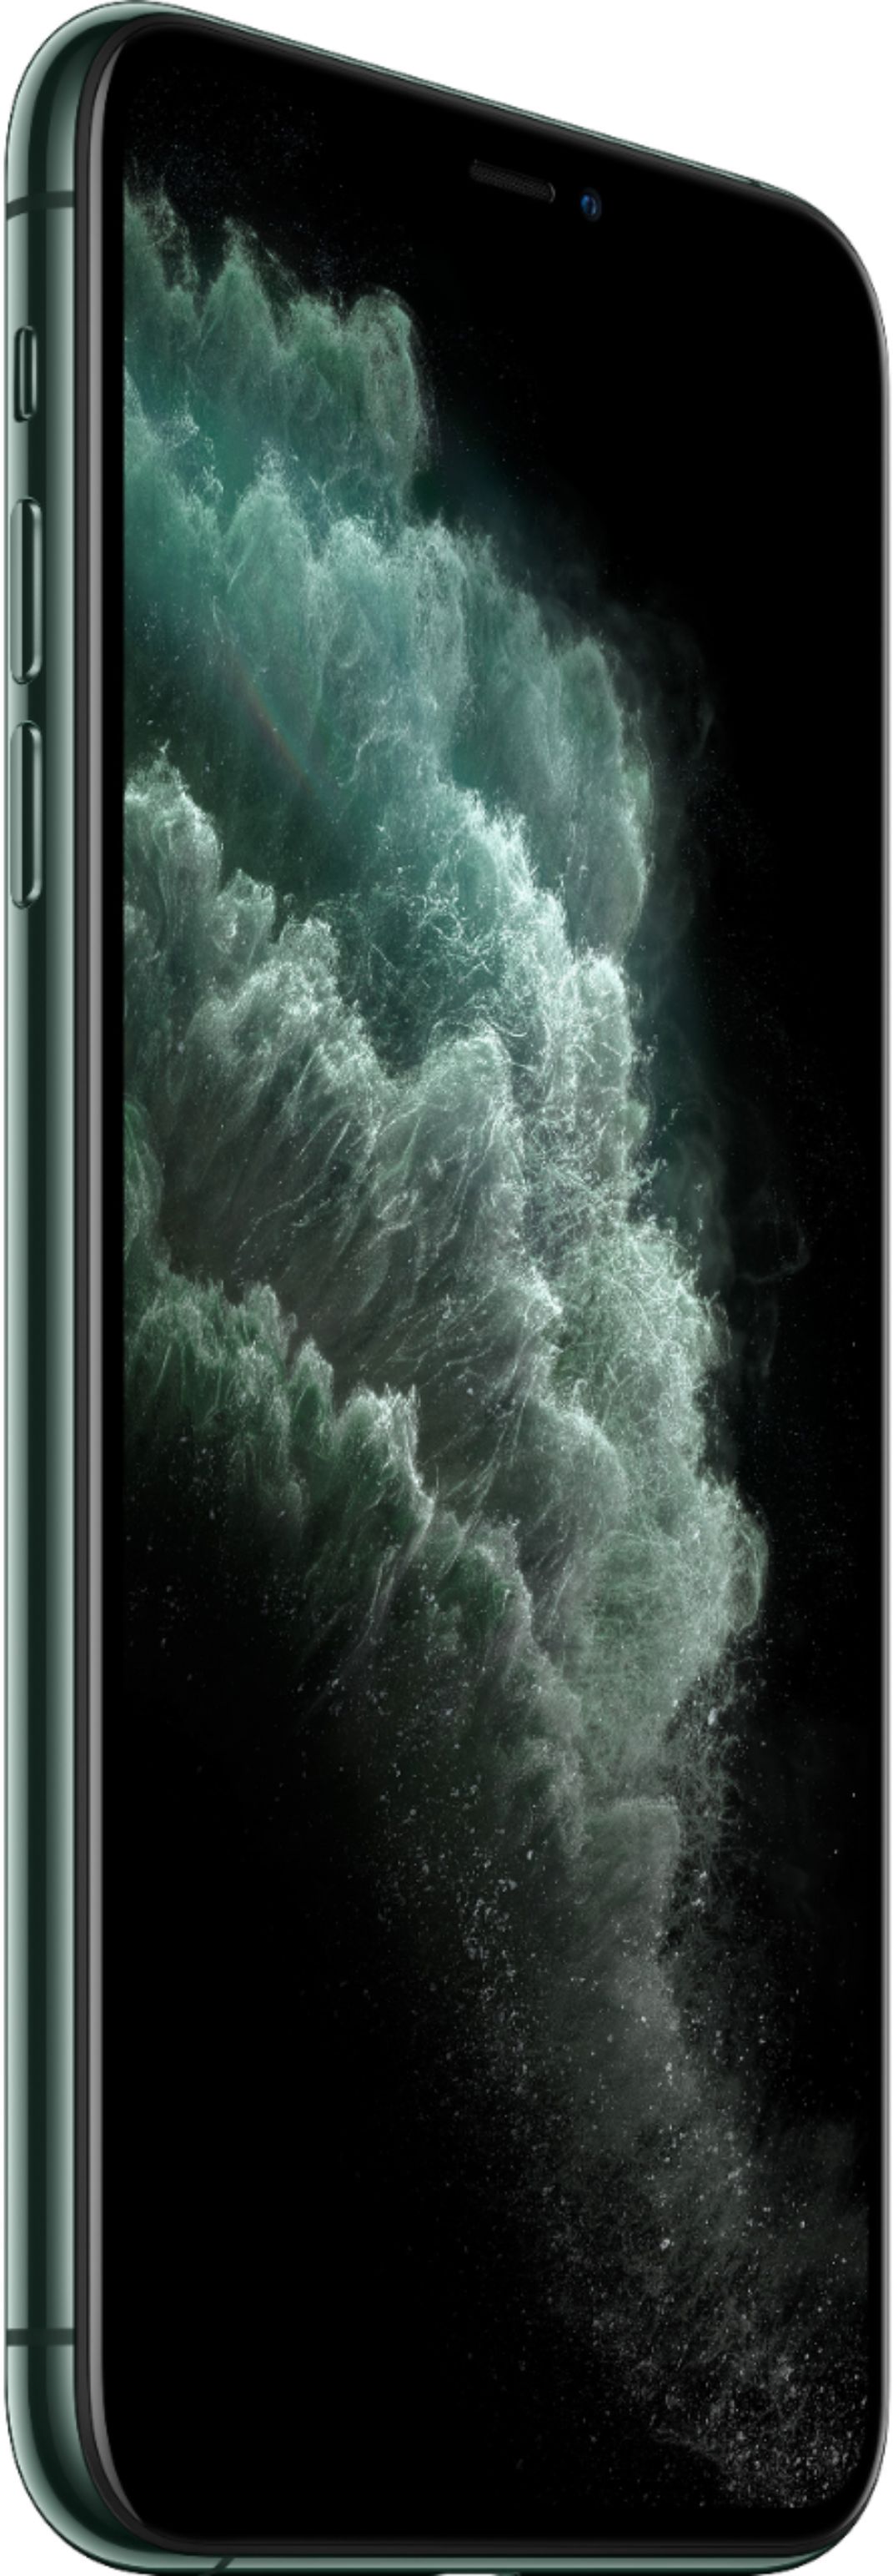 Best Buy Apple Iphone 11 Pro Max 256gb Midnight Green At T Mwh72ll A